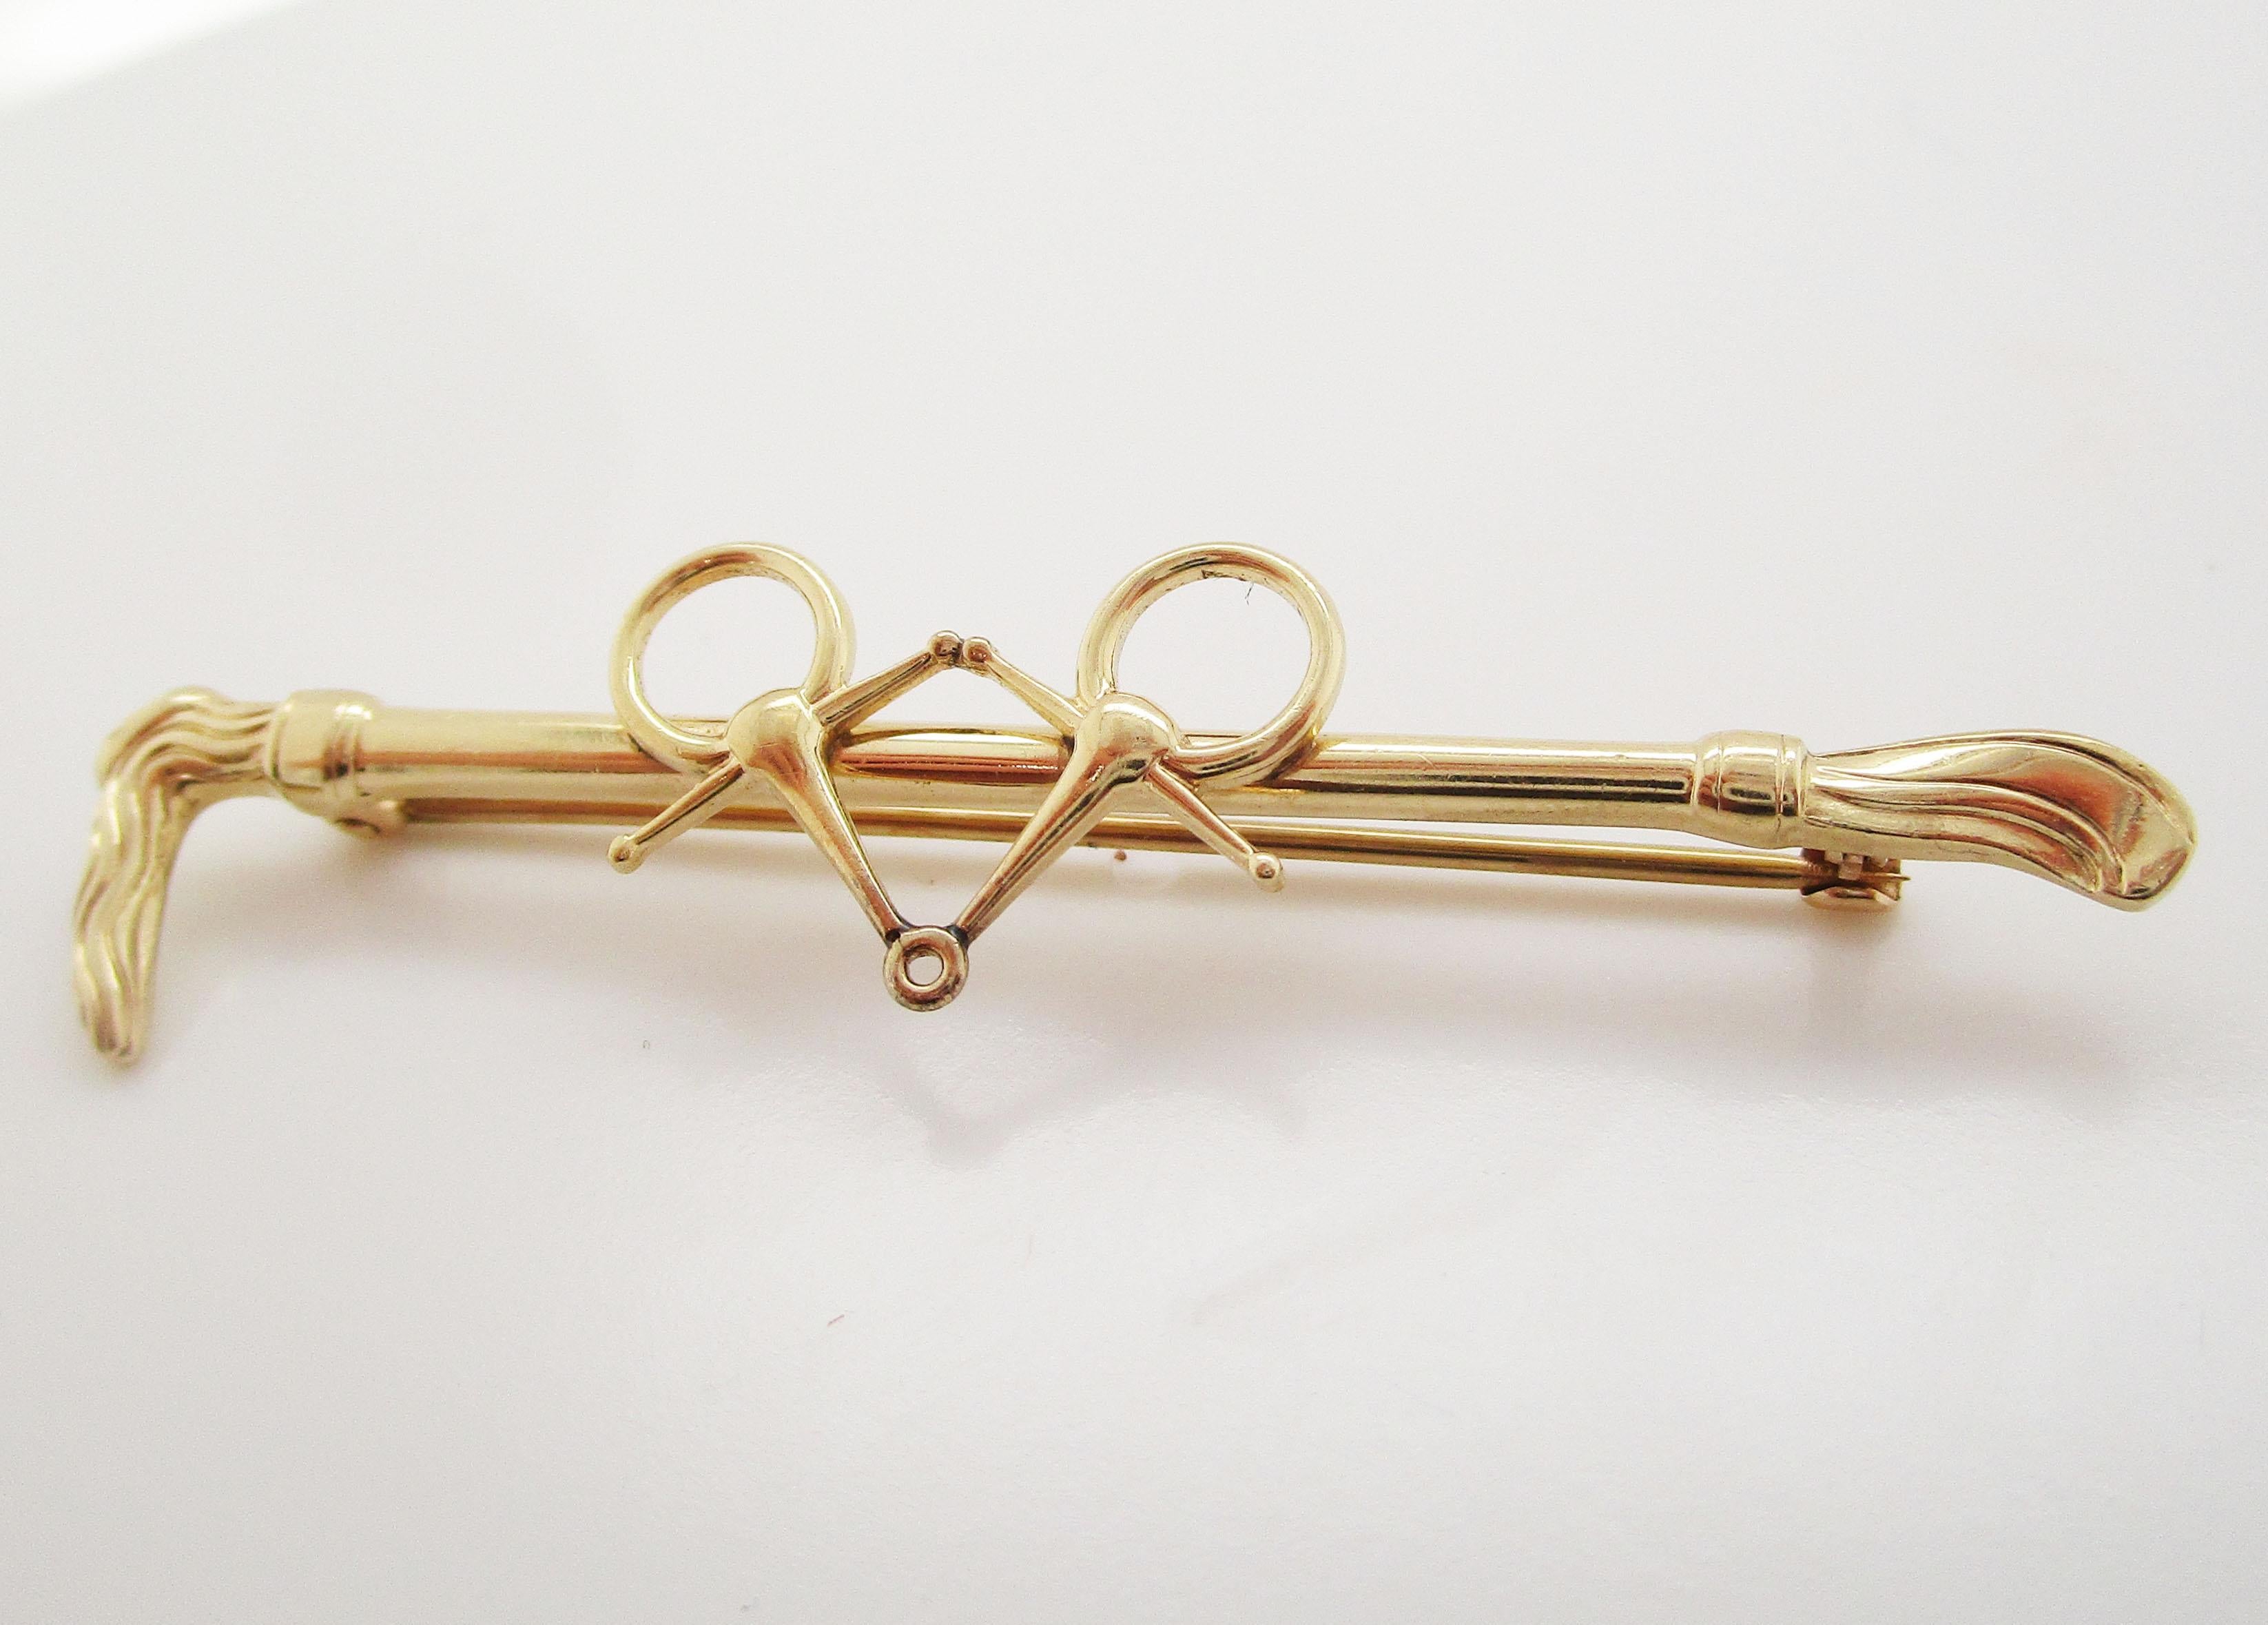 This is a beautiful Art Deco bar or stock pin in 14k yellow gold with a lovely snaffle bit over a riding crop design! This pin is in excellent condition and is the ideal gift for the equine enthusiast that you know. With its dramatic length and